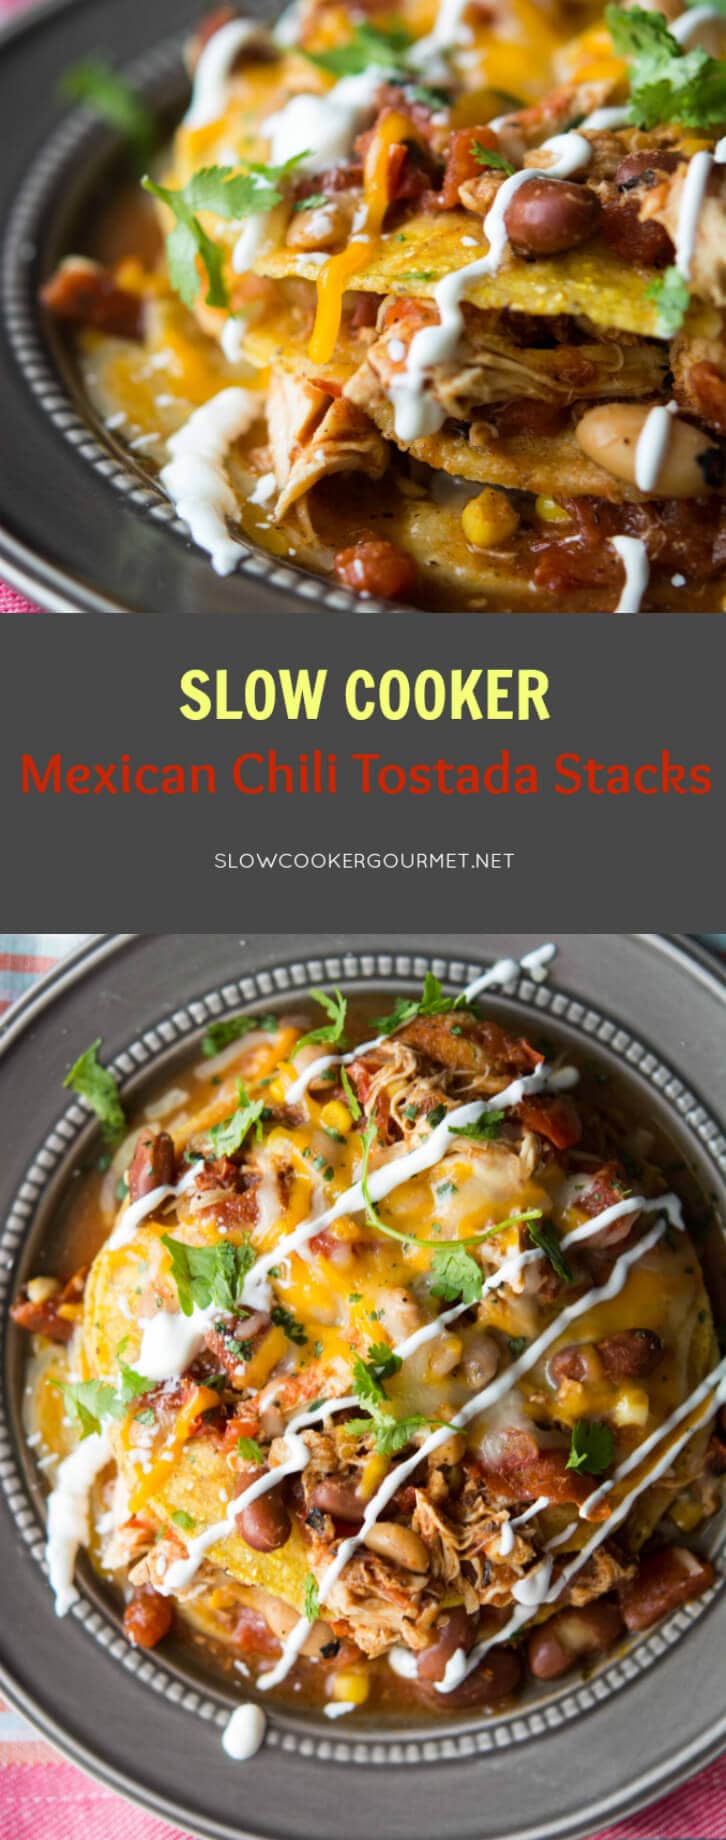 Slow Cooker Mexican Chili Tostada Stacks - Slow Cooker Gourmet